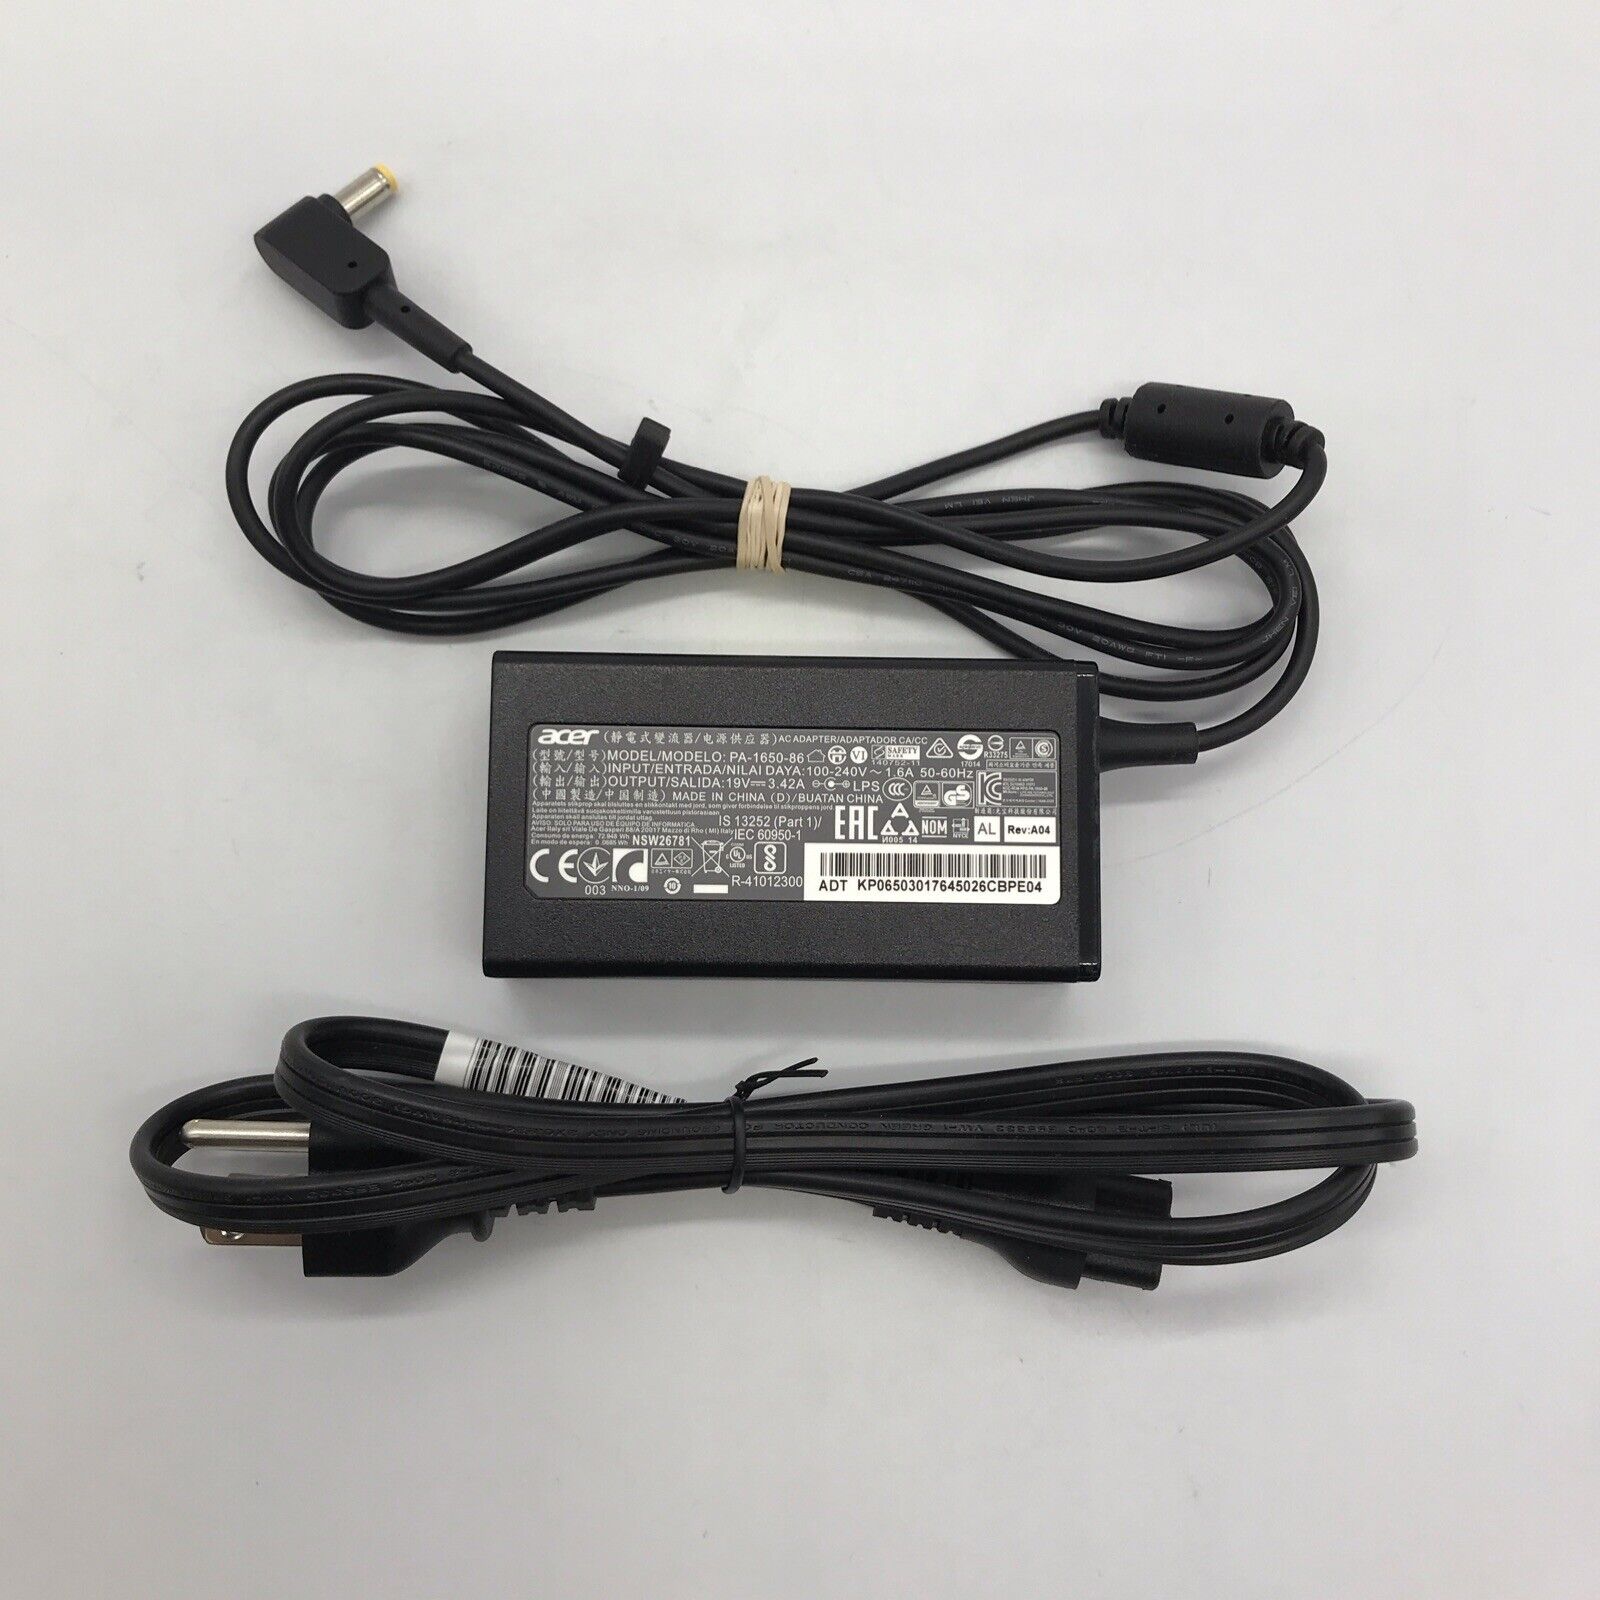 Genuine OEM Acer 65W 19V 3.42A Power Adapter PA-1650-86 - Yellow Barrel